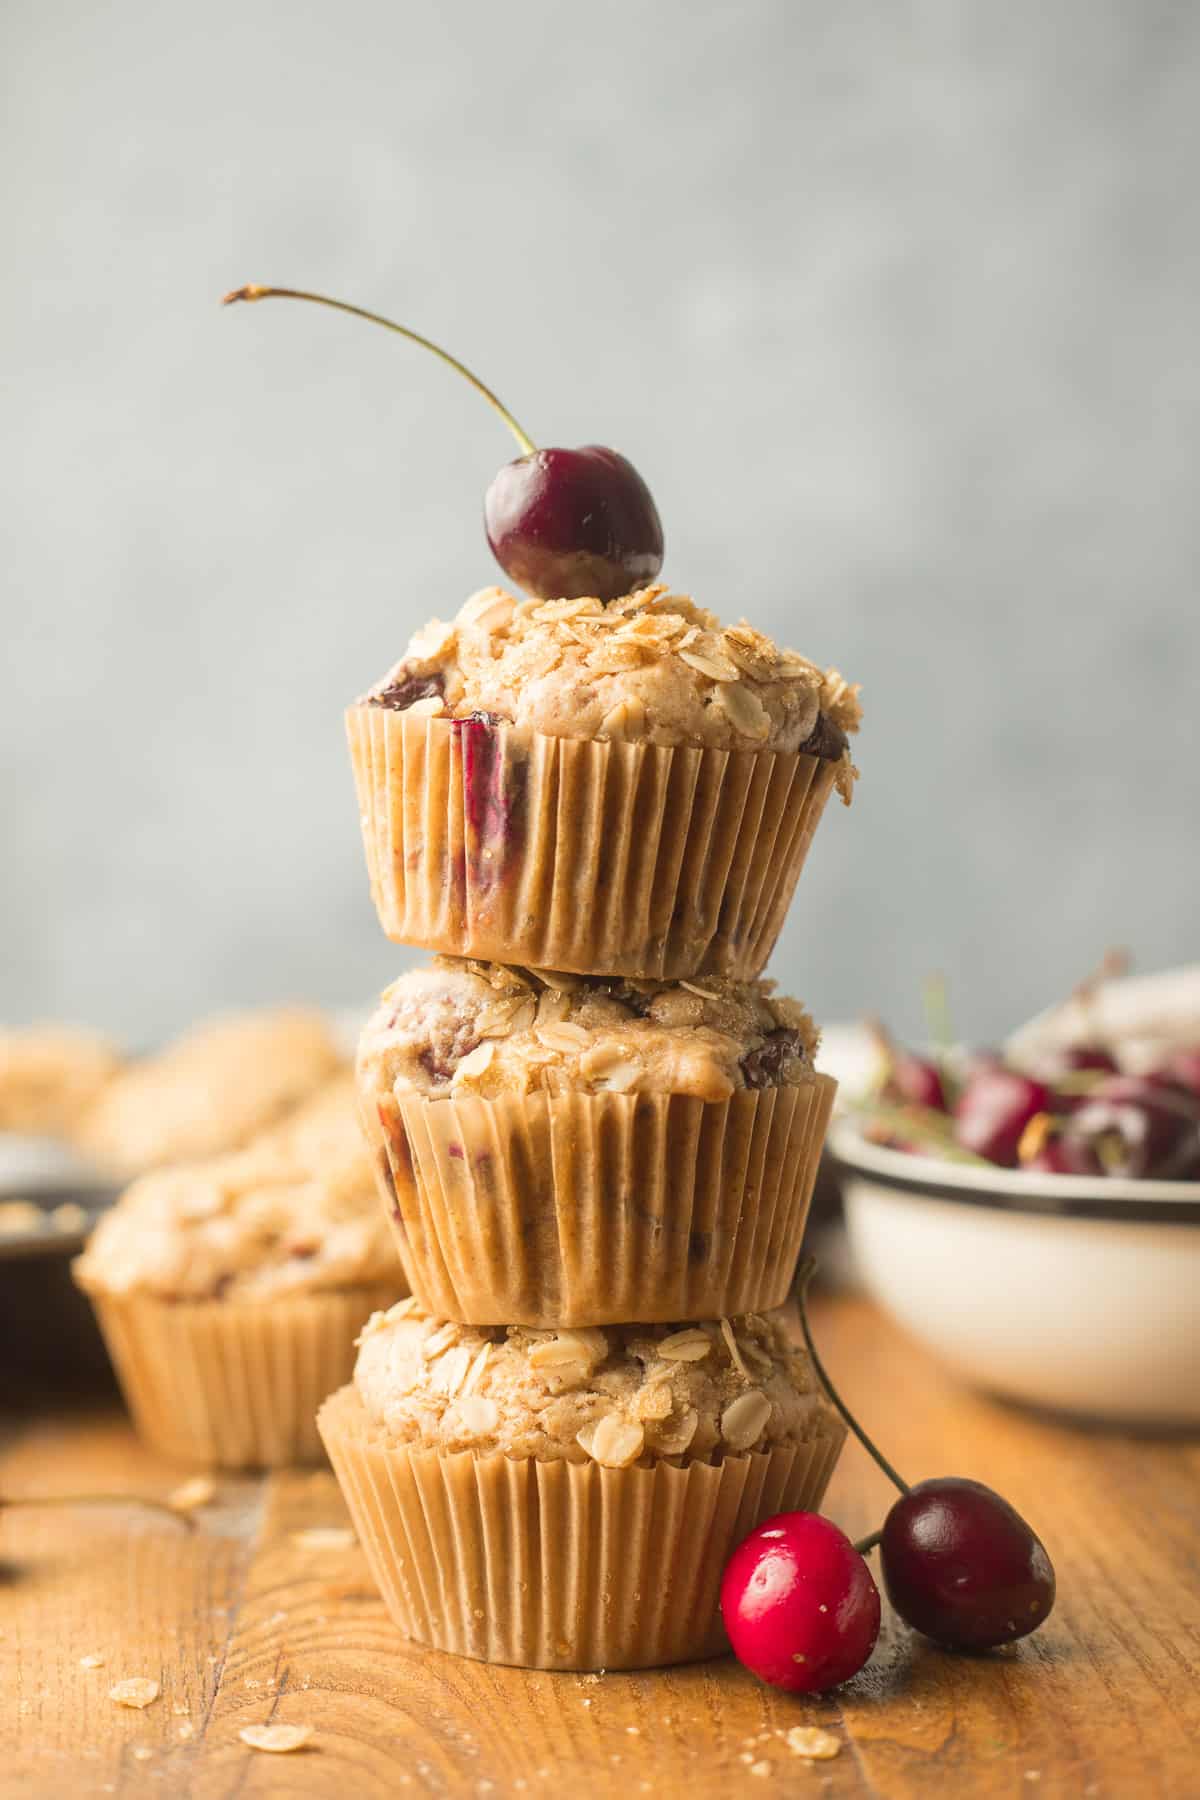 Stack of 3 Vegan Cherry Muffins with a Cherry on Top